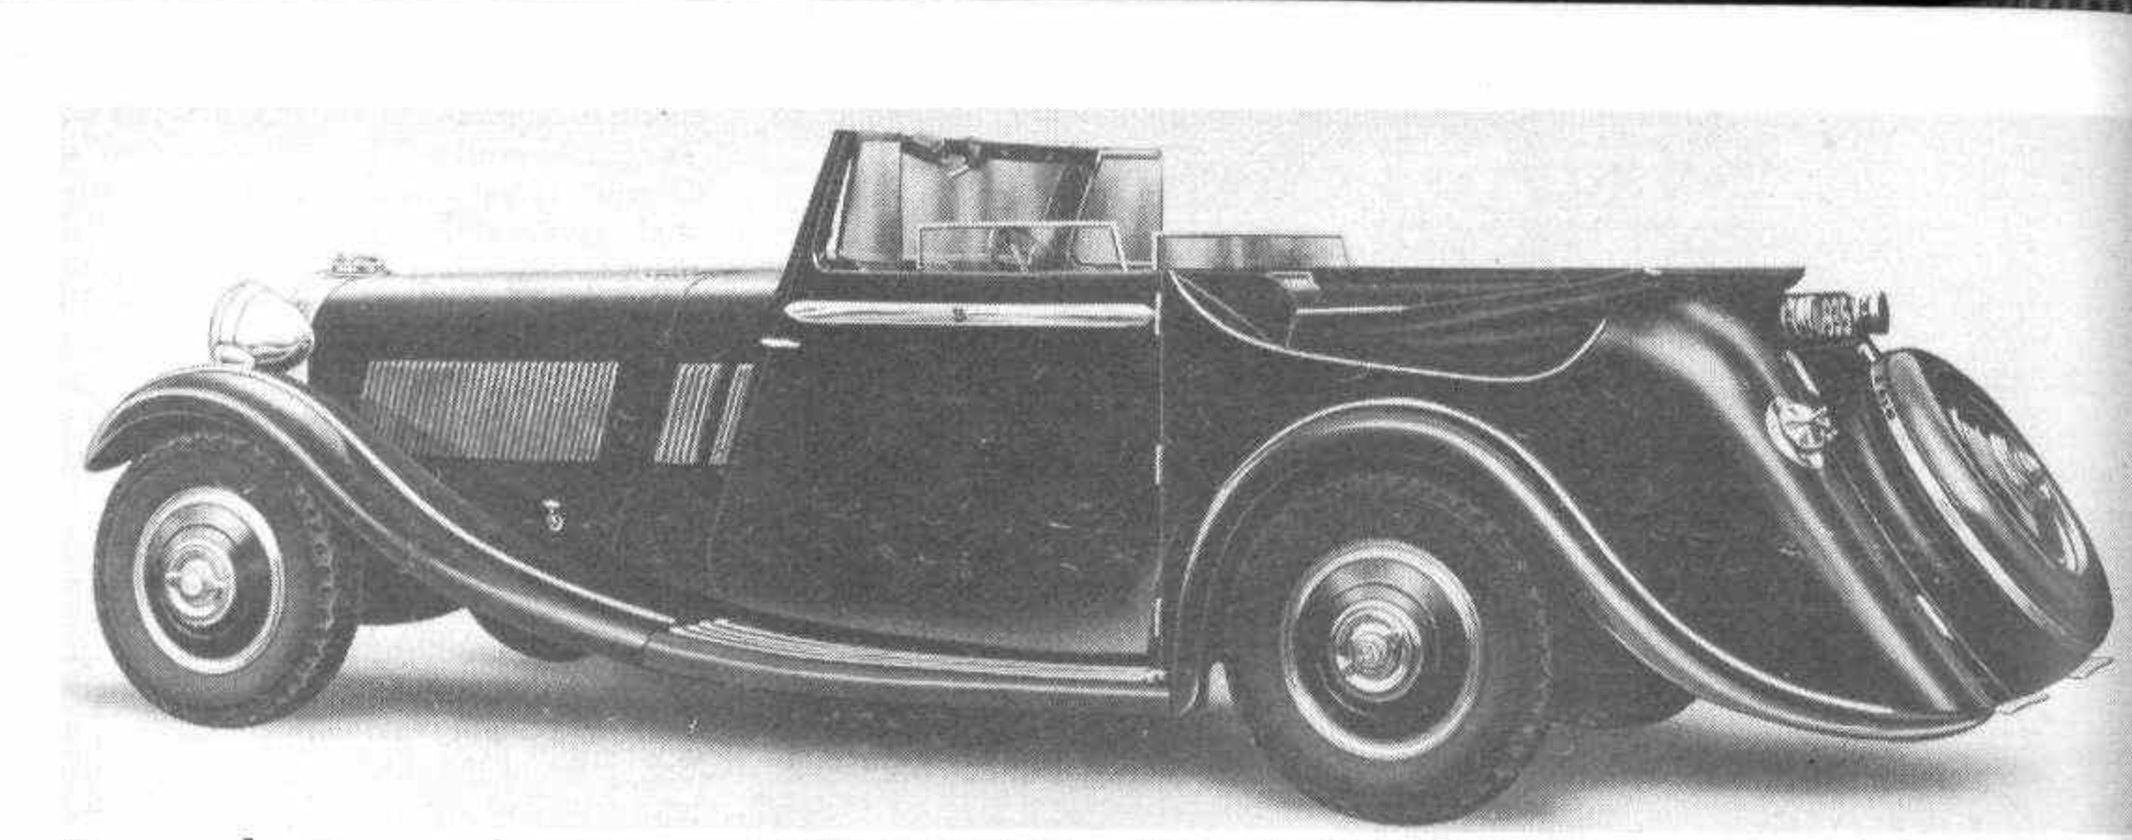 1936 picture of the drophead coupé Brough Superior 4.2 liter eight. The cover folds down flush with the body line. (Picture courtesy motorsportmagazine.com).